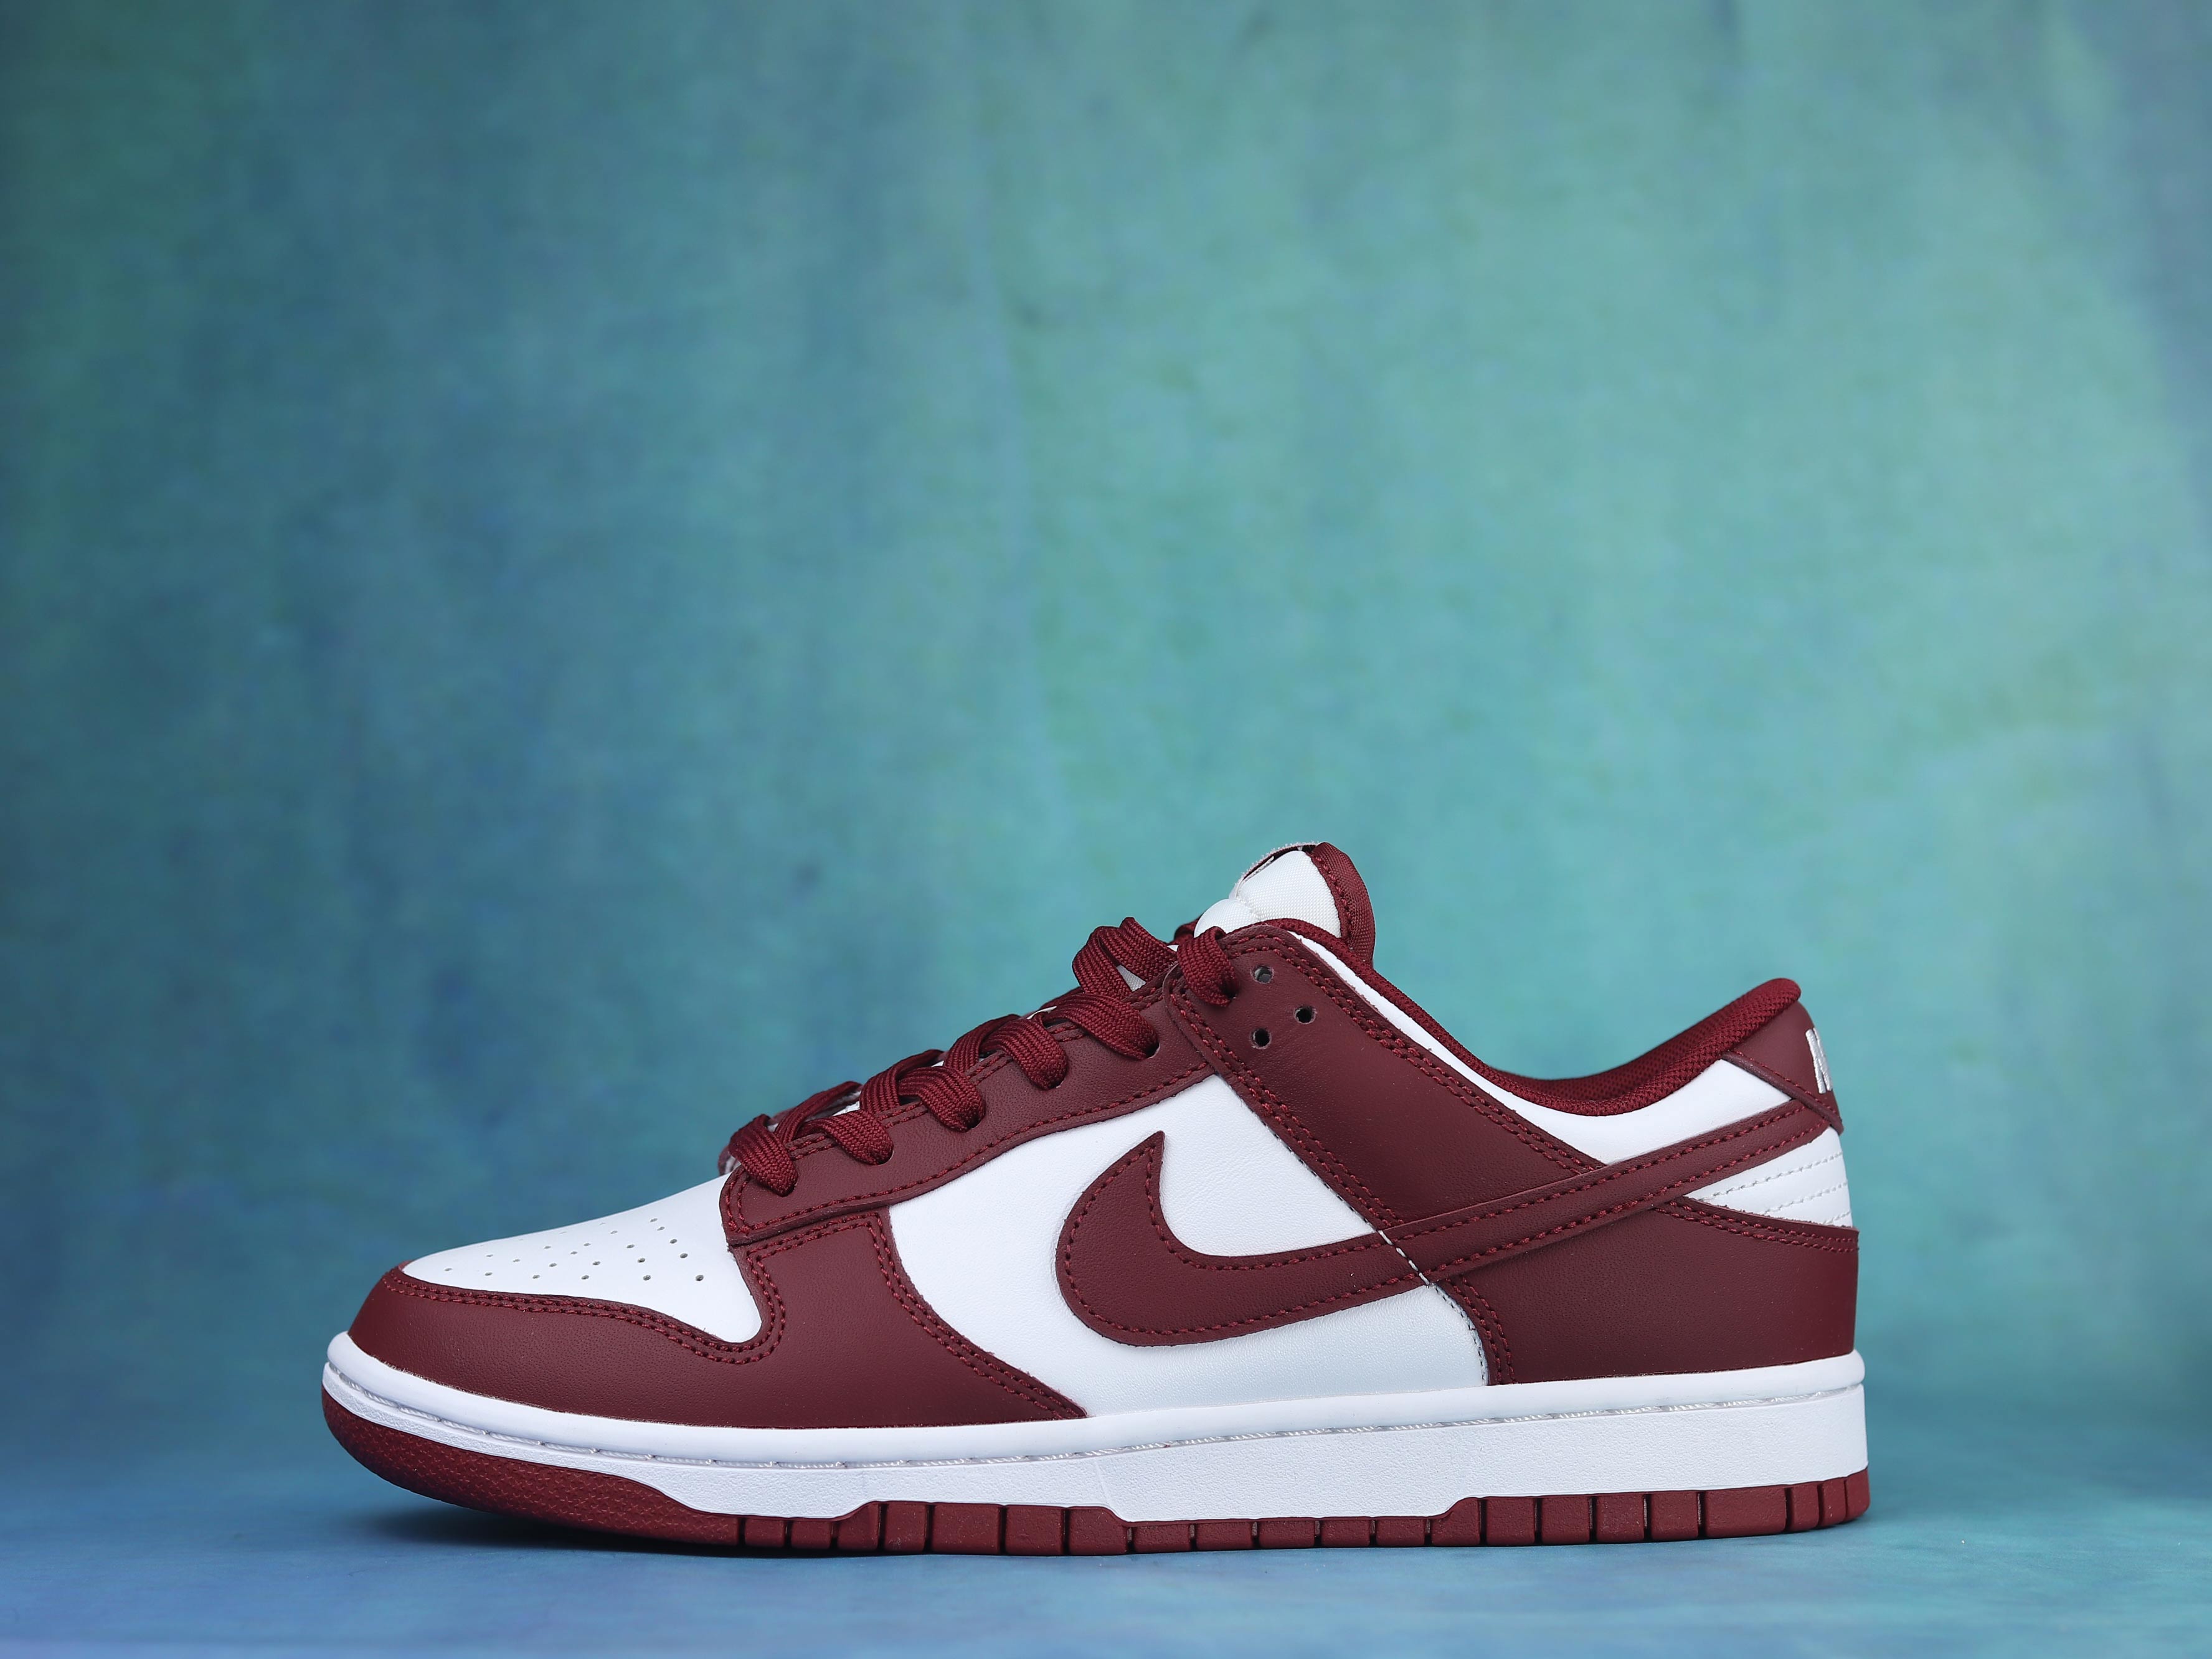 Dunk low "team red"